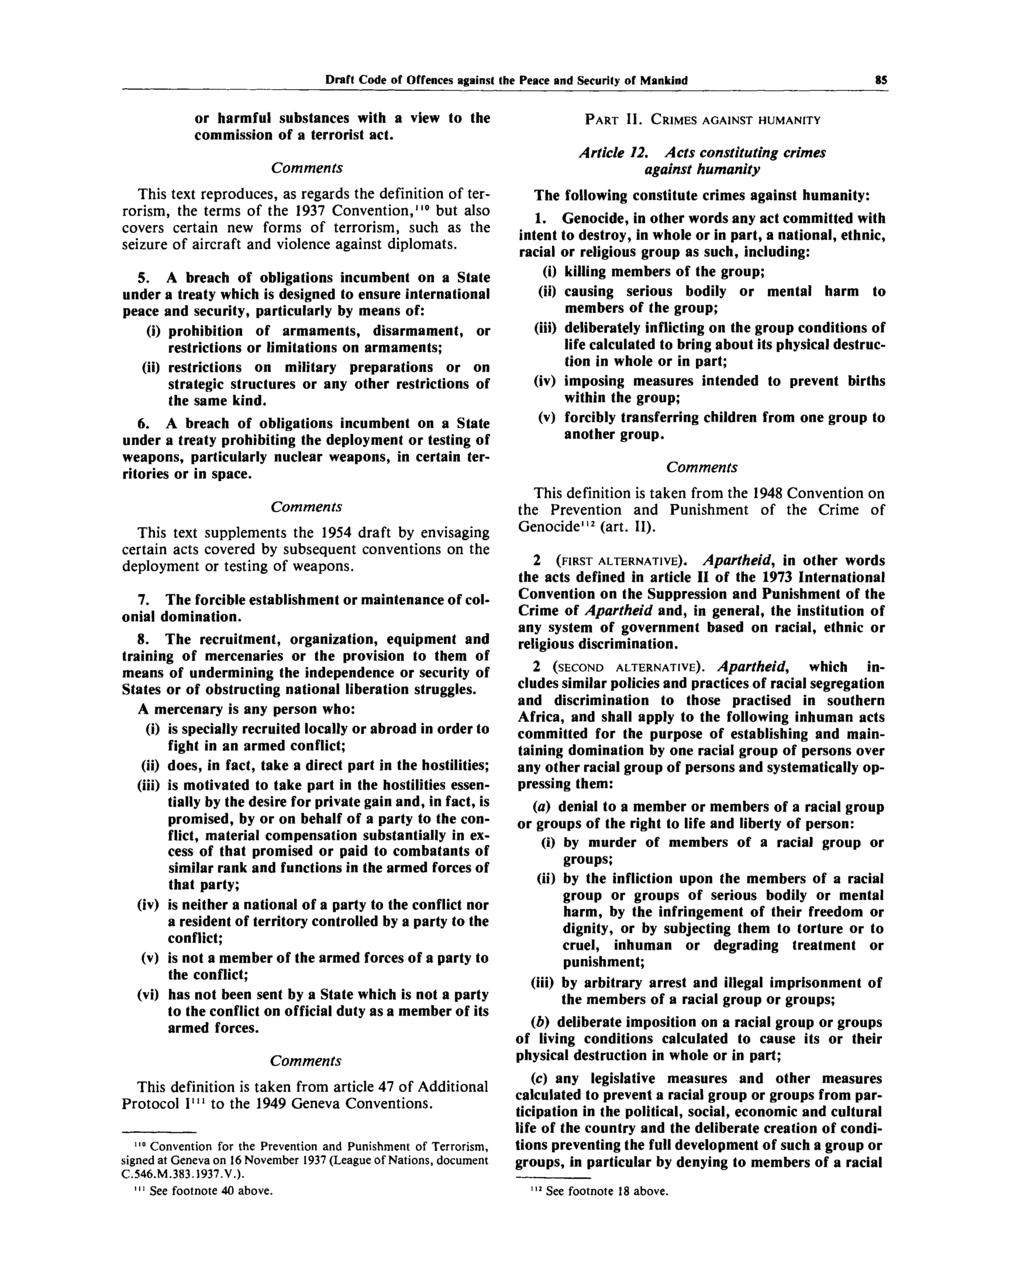 Draft Code of Offences against the Peace and Security of Mankind 85 or harmful substances with a view to the commission of a terrorist act.